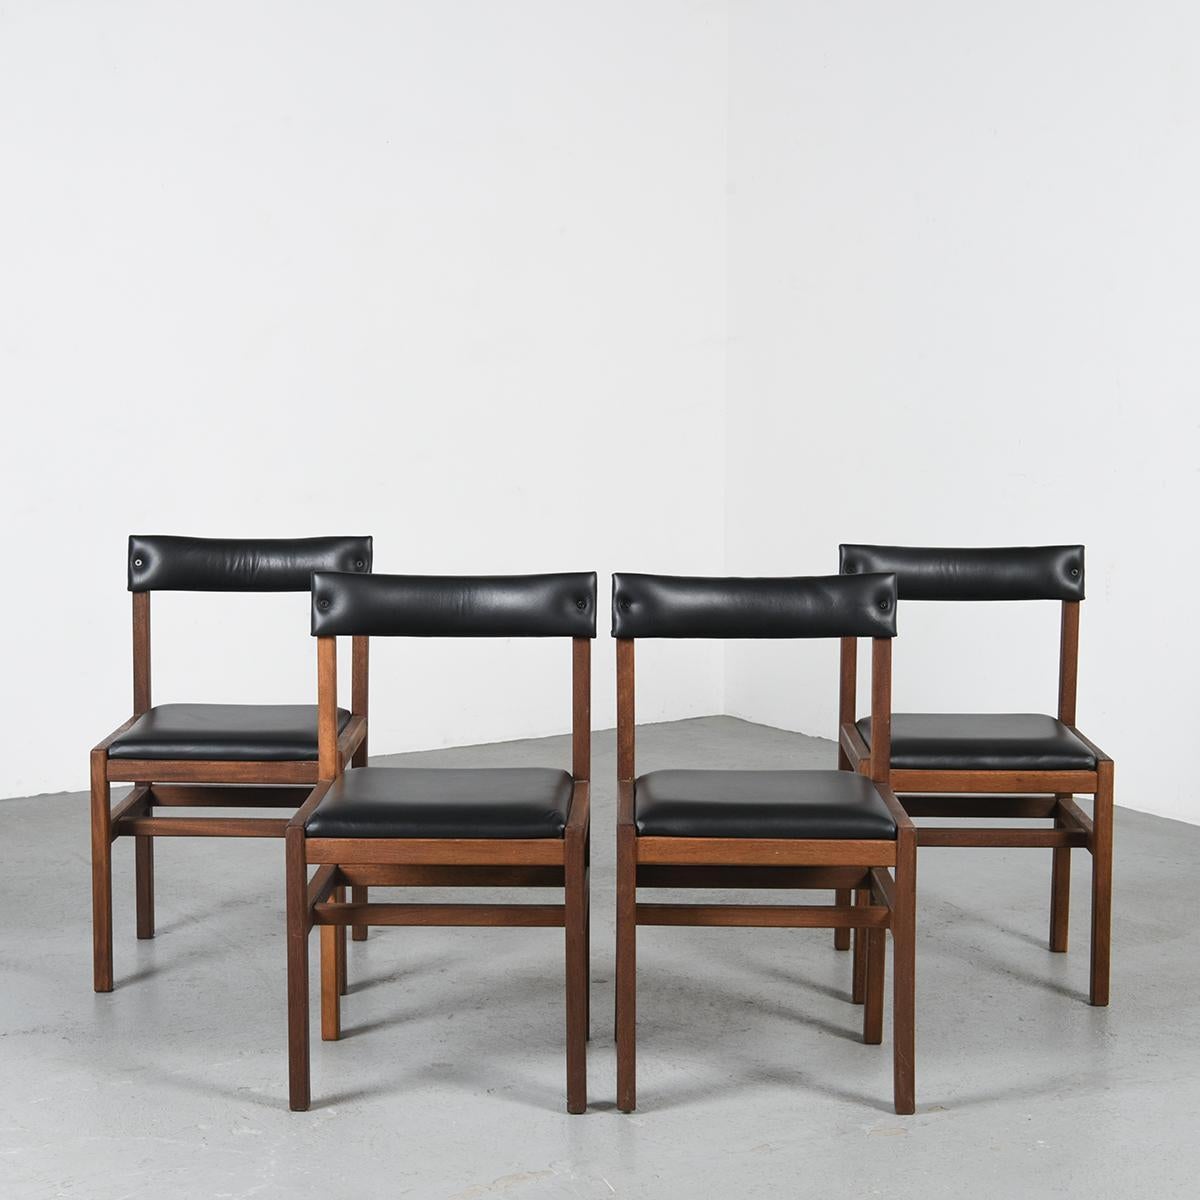 Set of 4 chairs by the cabinetmaker and designer from Lyon André Sornay, inventor of numerous patented systems, in particular the mounting with rods, of which these chairs are a fine example.

The solid wood structure accommodates the seat and